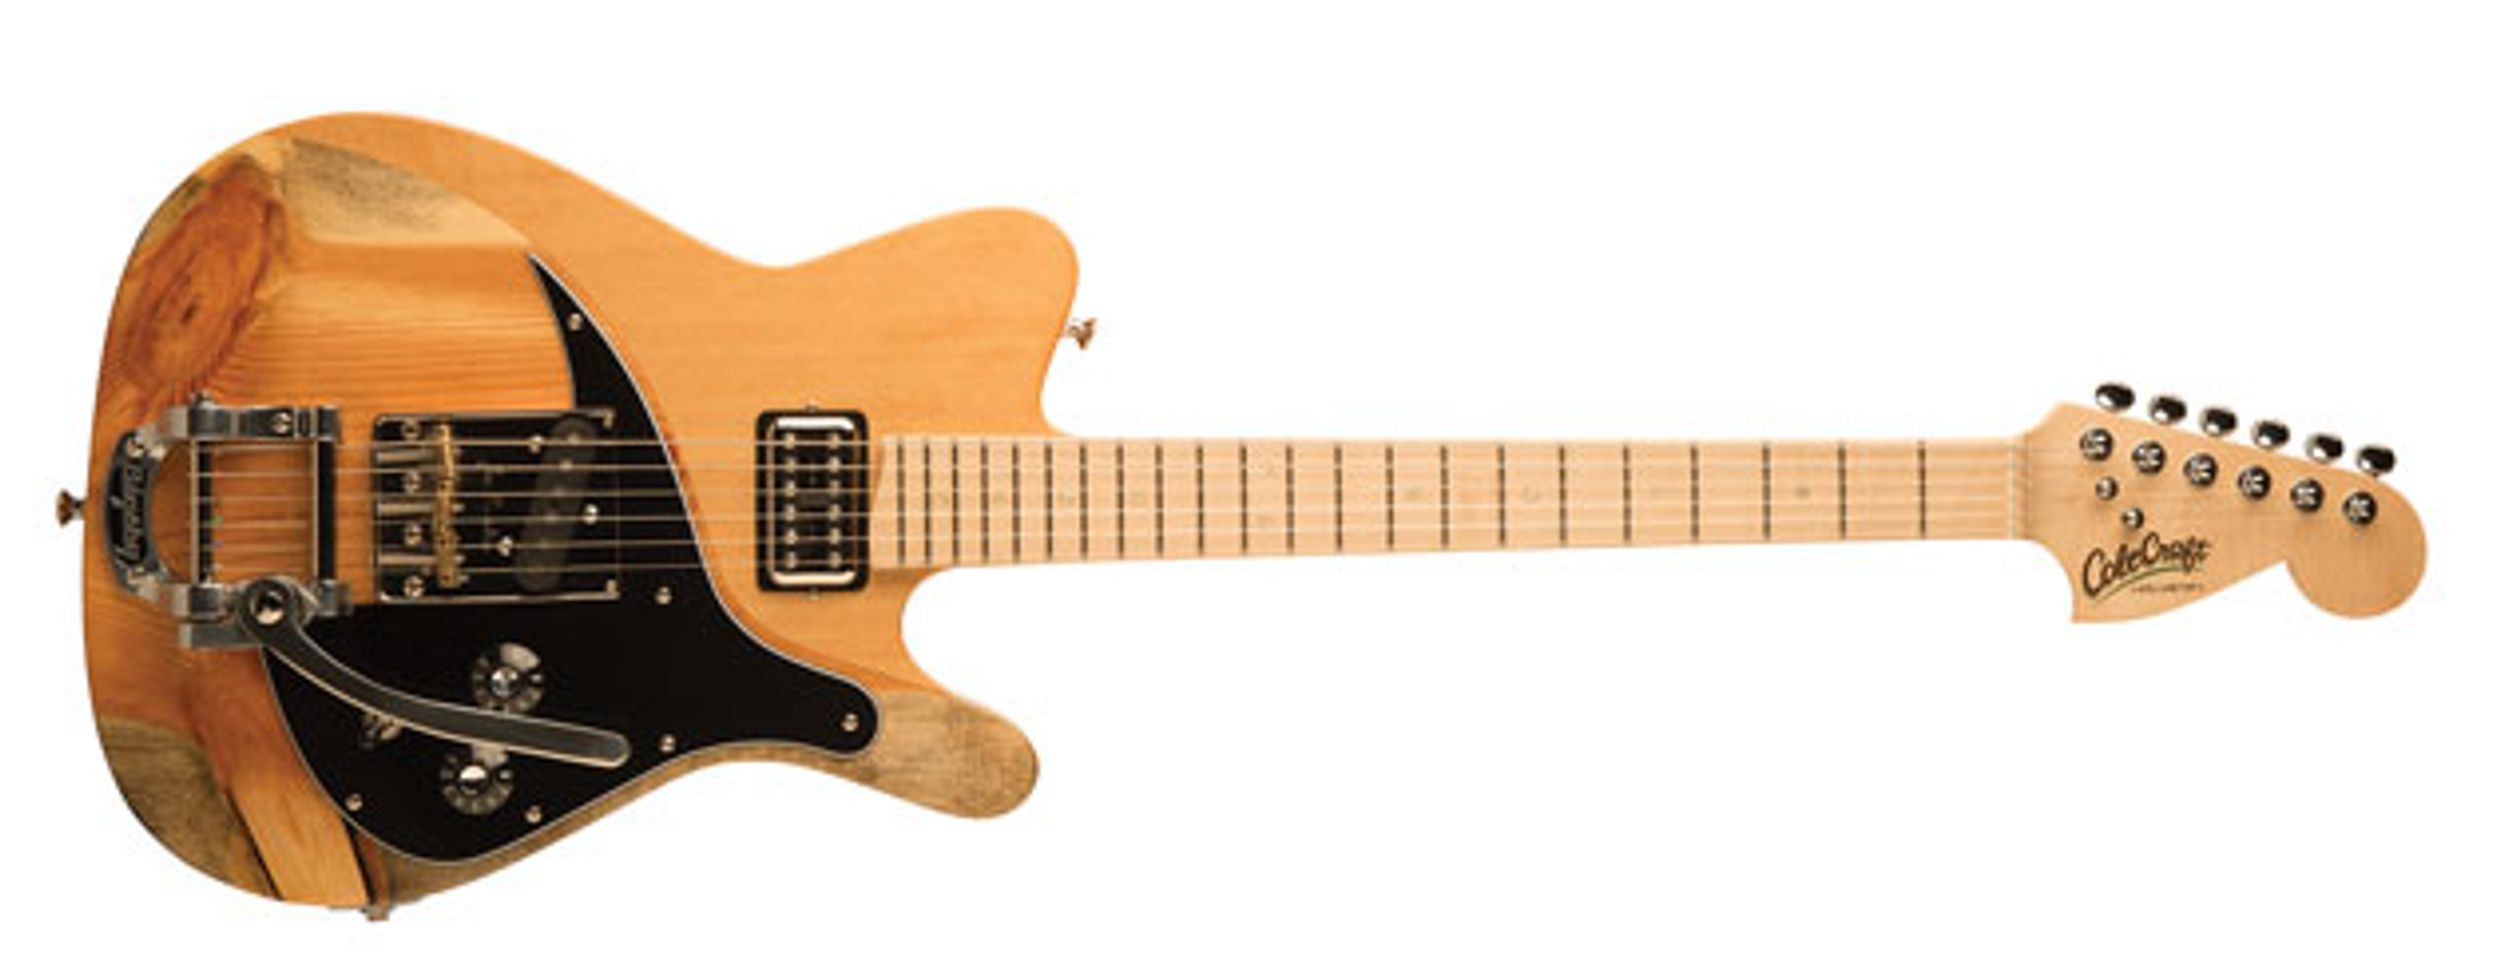 ColeCraft Guitar Company Introduces the HollowTop